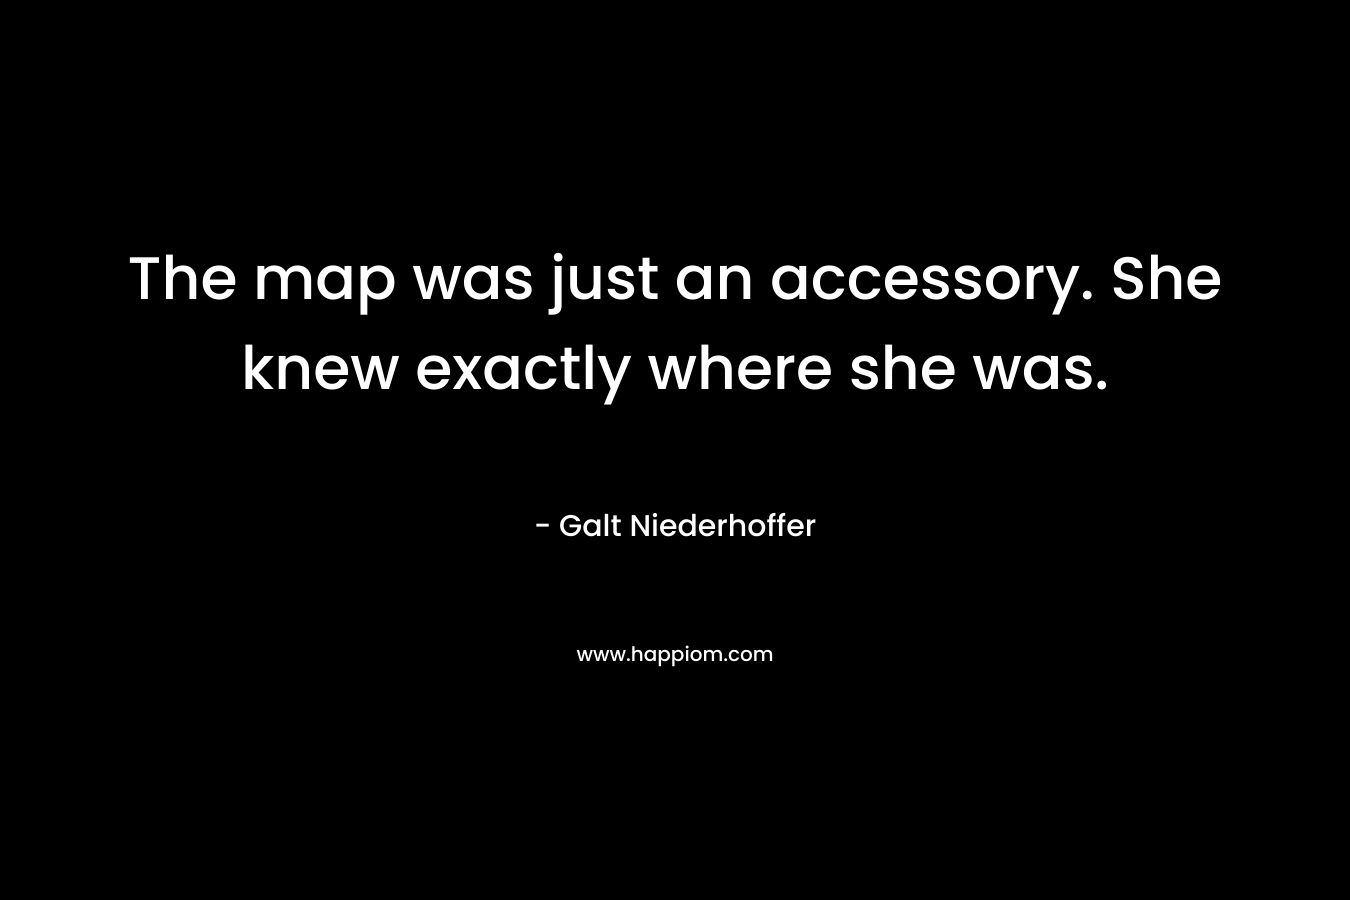 The map was just an accessory. She knew exactly where she was. – Galt Niederhoffer